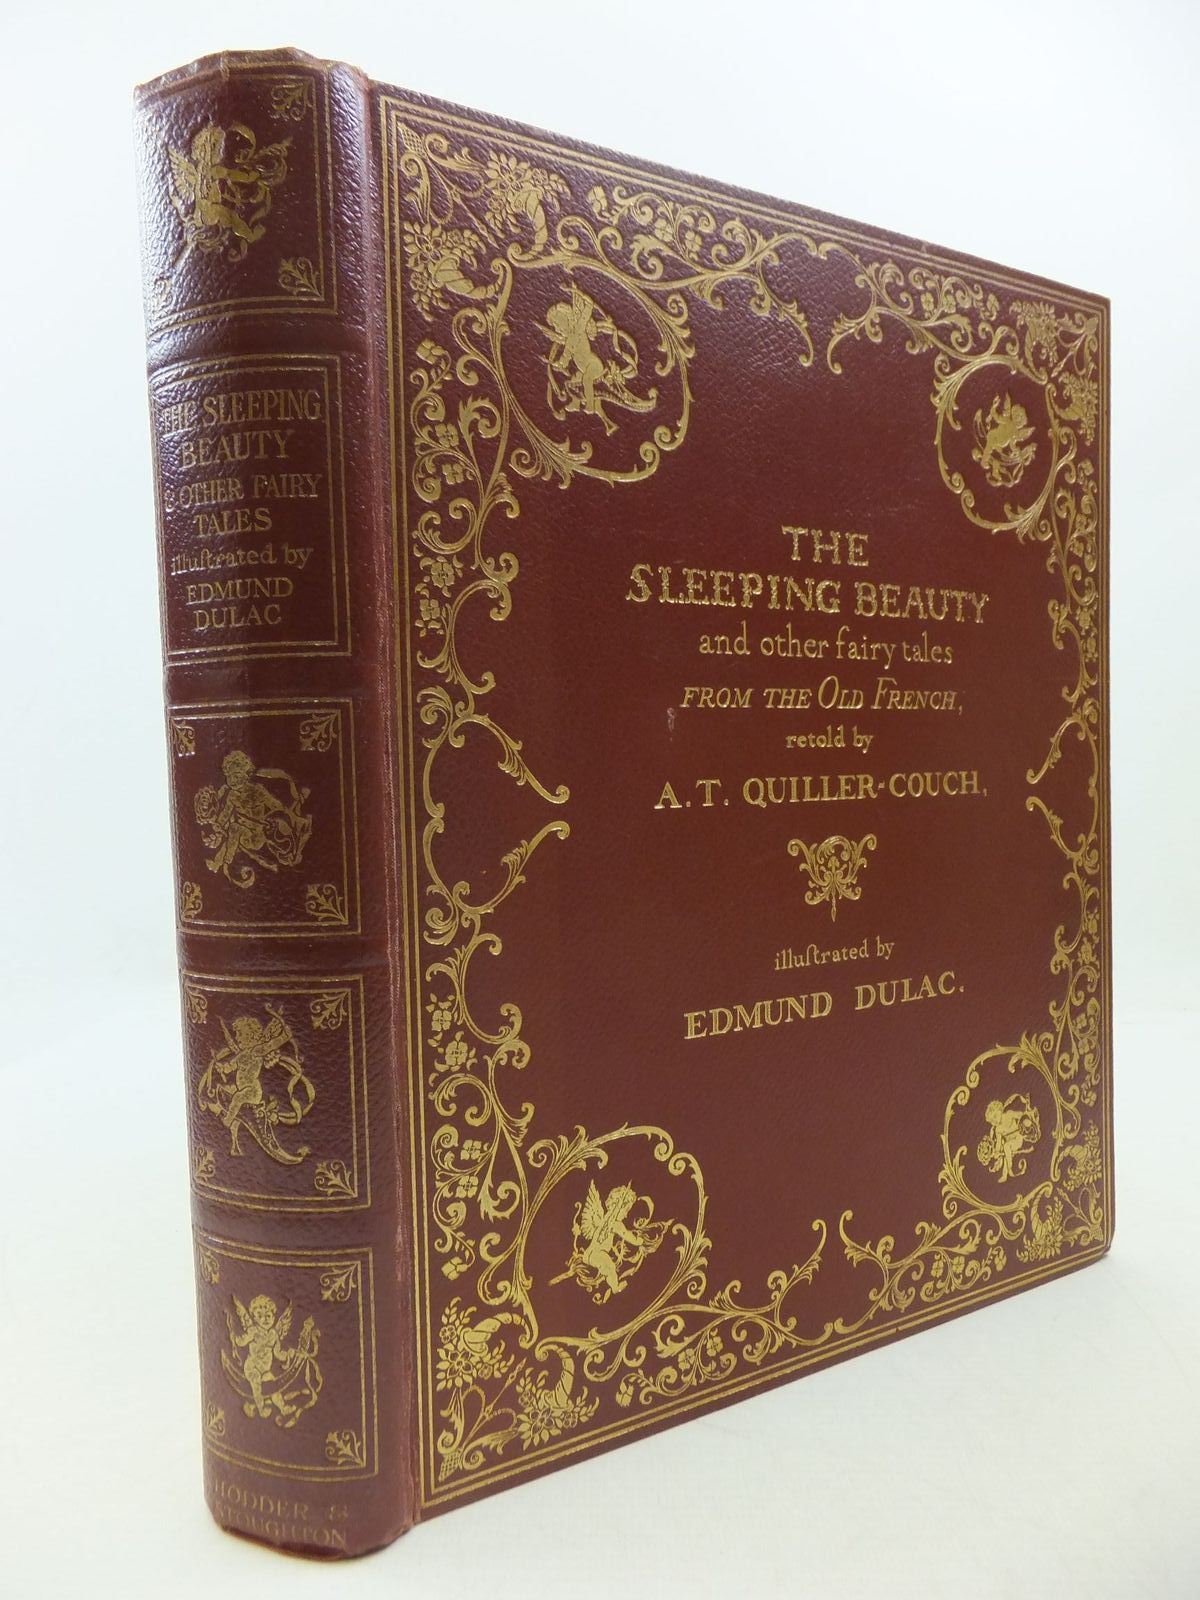 The Sleeping Beauty & Other Fairy Tales From The Old French